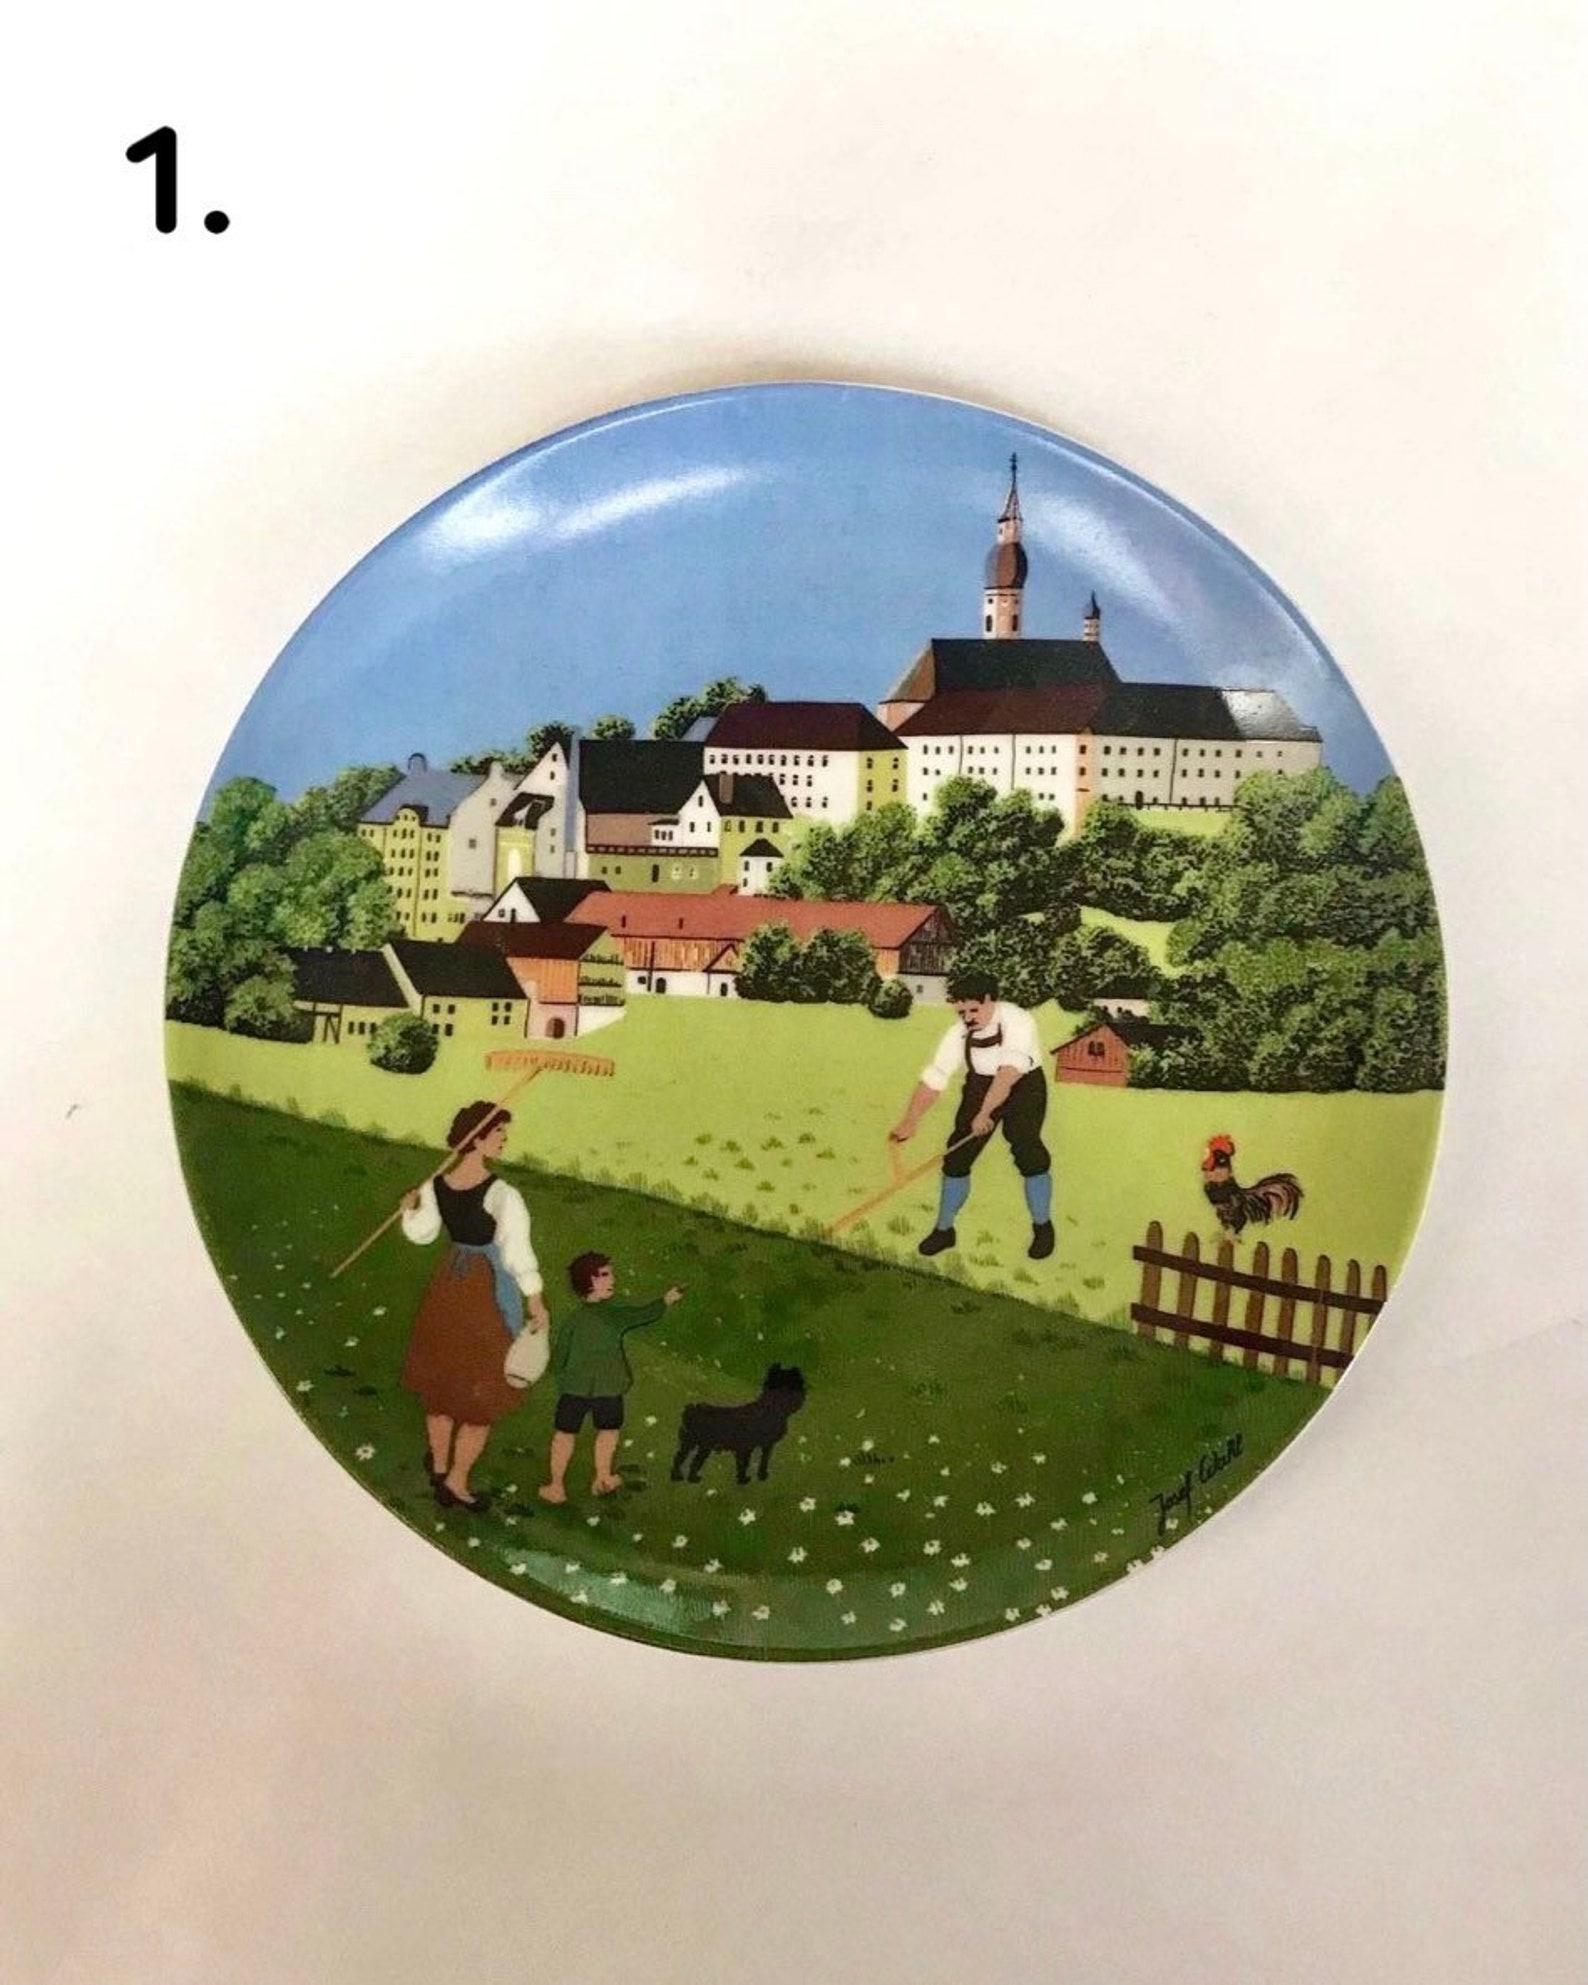 Lovely decorative plates “Morning”, “Noon”, “Evening” and “Night”, produced by the privileged royal porcelain factory Royal Tettau in collaboration with illustrator Josef Wahl.

Limited edition.

Germany. 

1970s.

In excellent condition, no